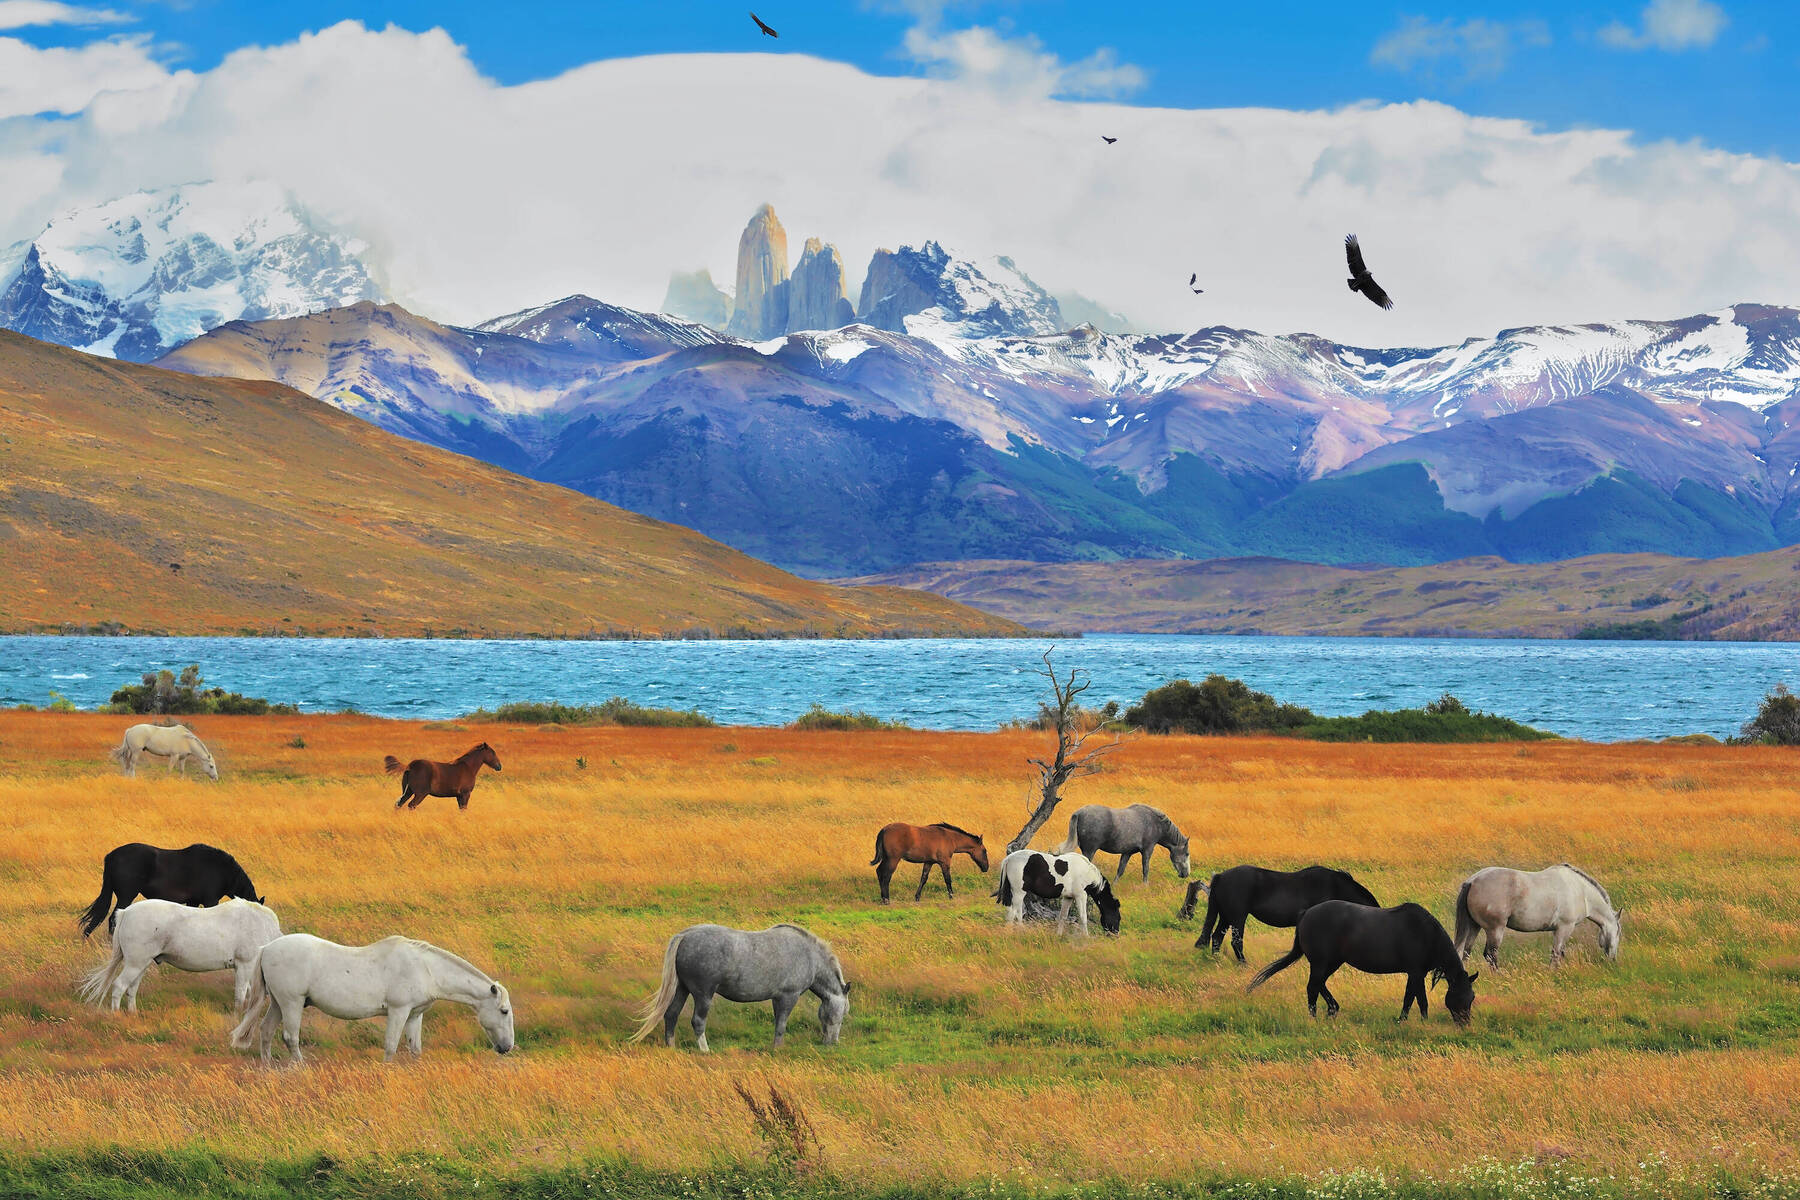 The Best Things to Do in Chilean Patagonia